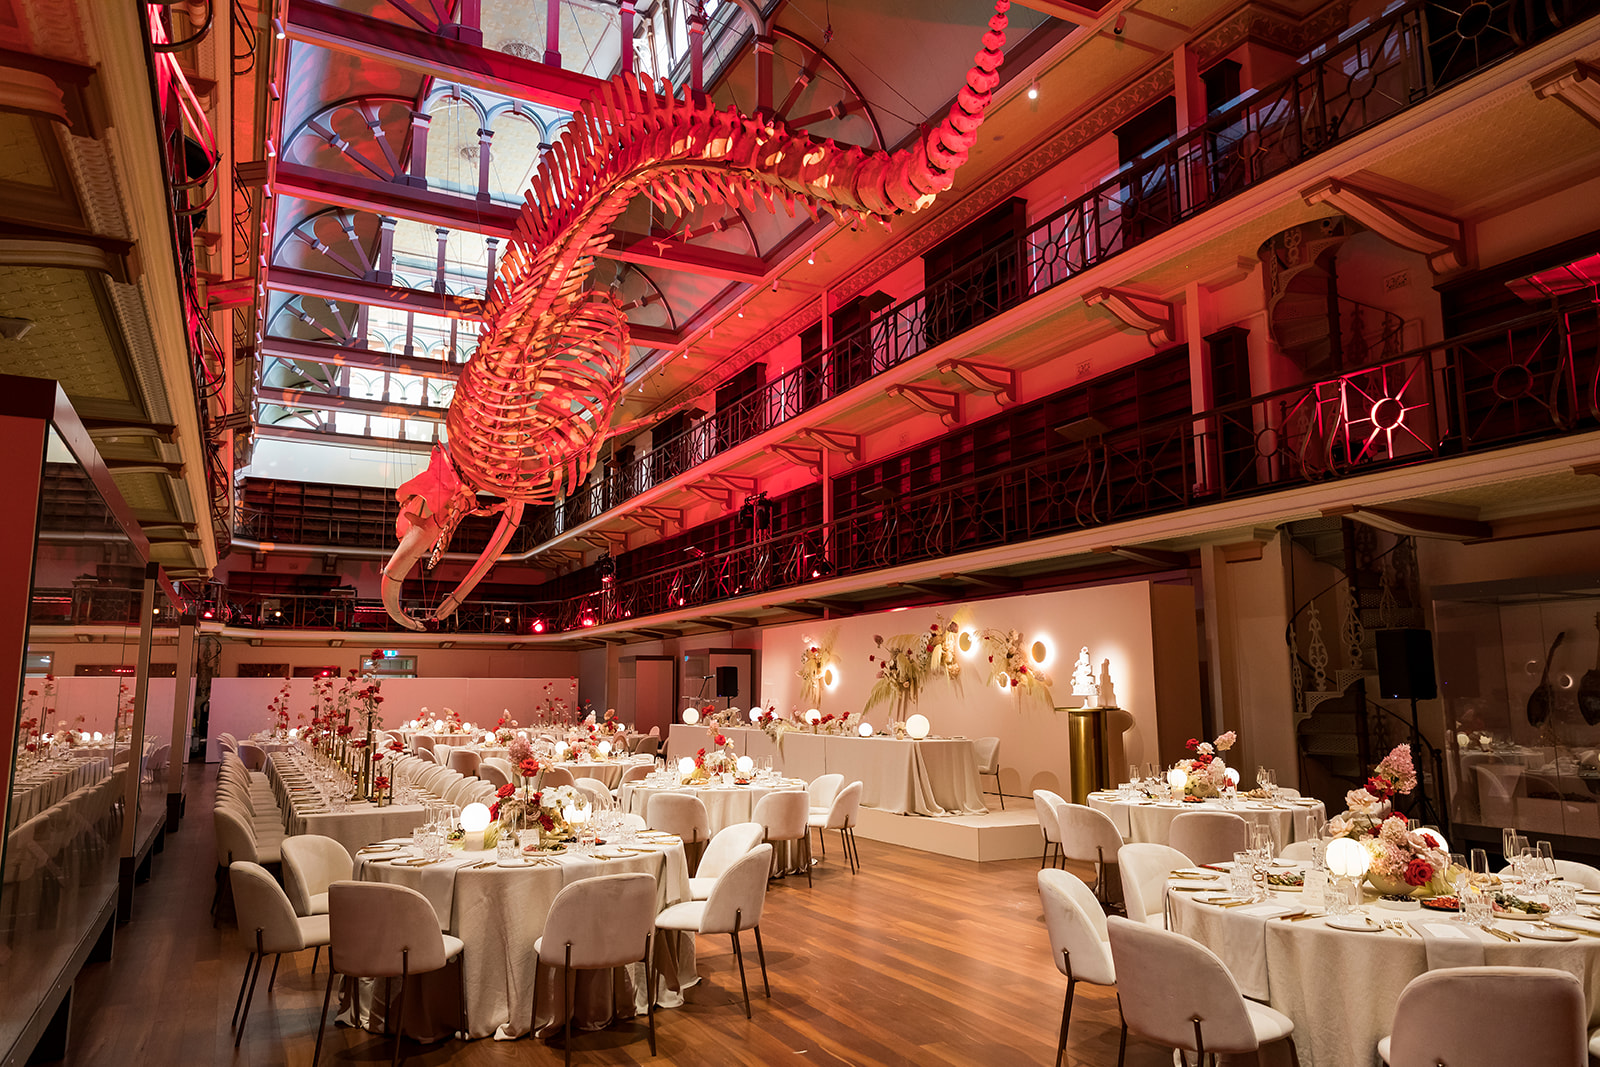 Wedding image featuring Hacket Hall, a whale skeleton floating above a setting area styles with red, white and gold flowers and candles, with a red light projected above. 